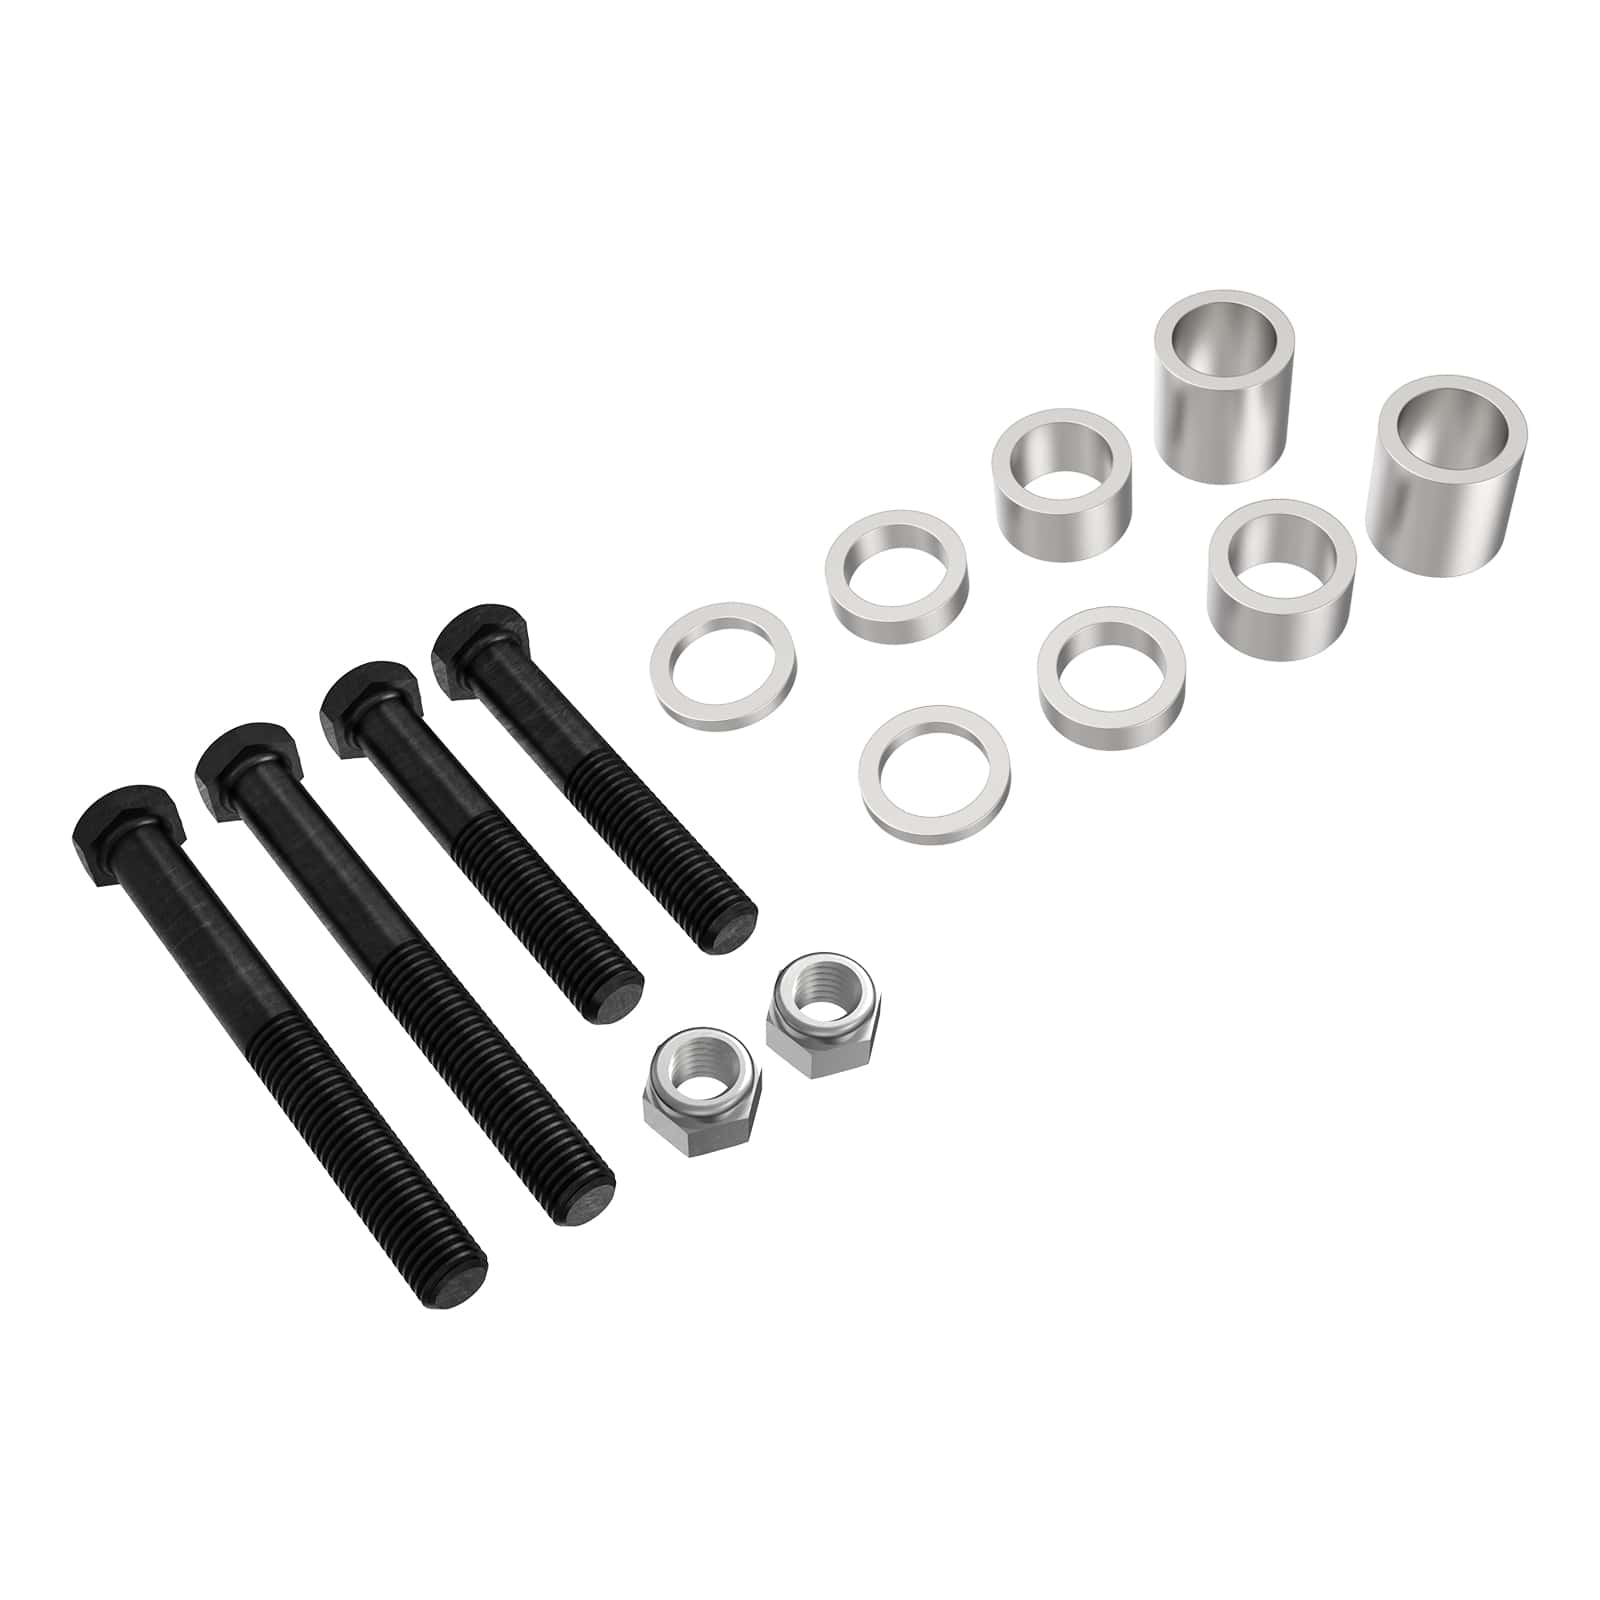 Adjustable Outer Tie-rod Ends For Maximum Power Bump Steer Kit For Ford Mustang GT V8 Roush & Saleen Vehicles